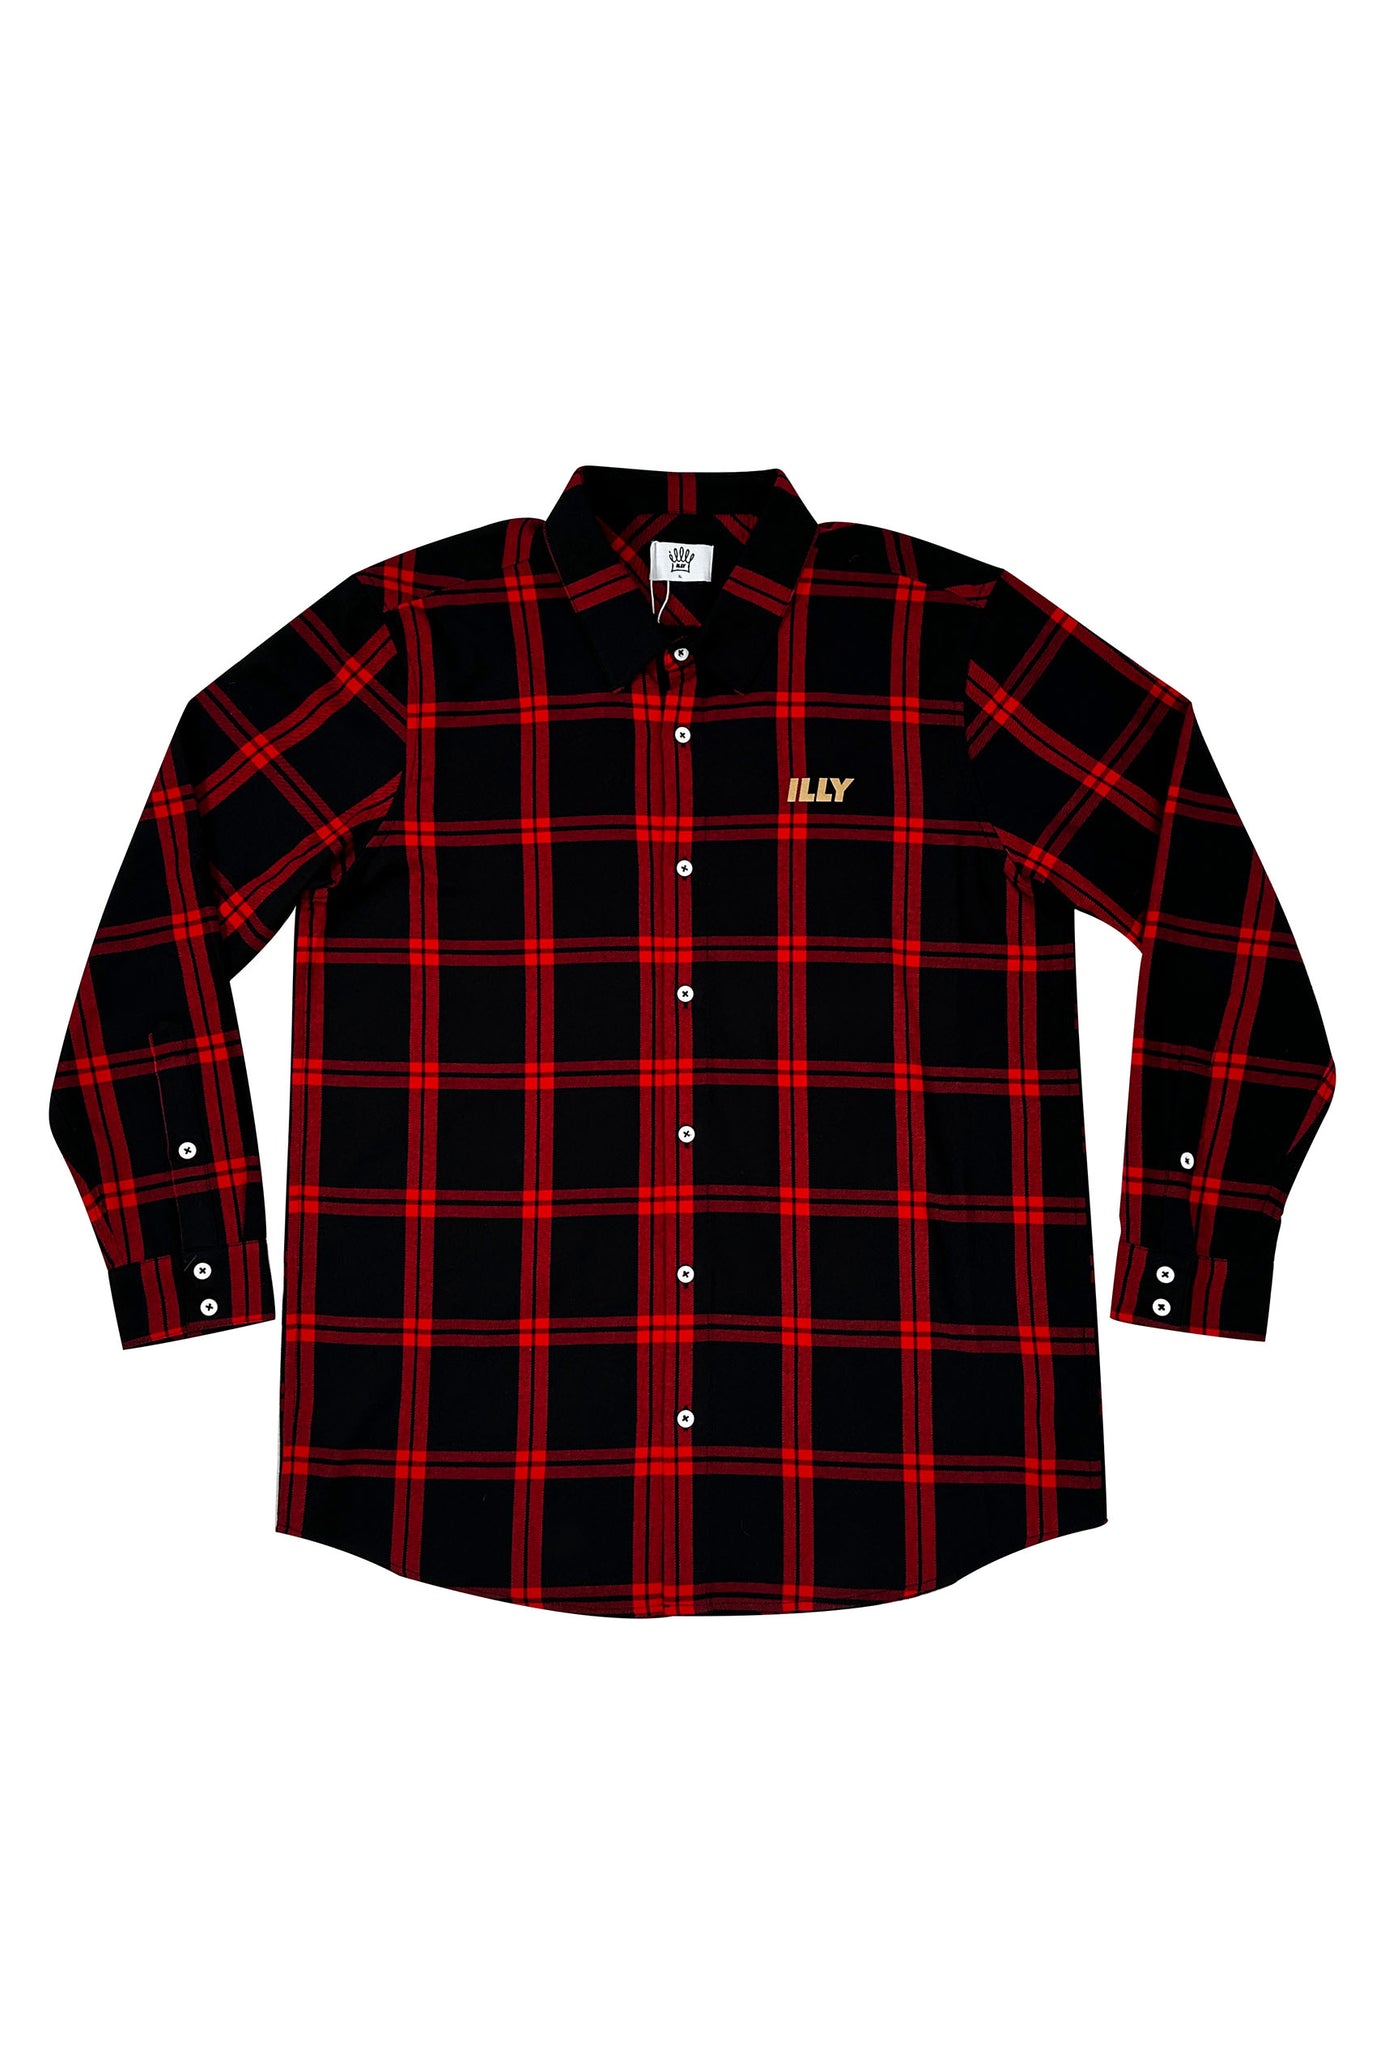 ILLY CLASSIC FLANNEL IN RED PLAID